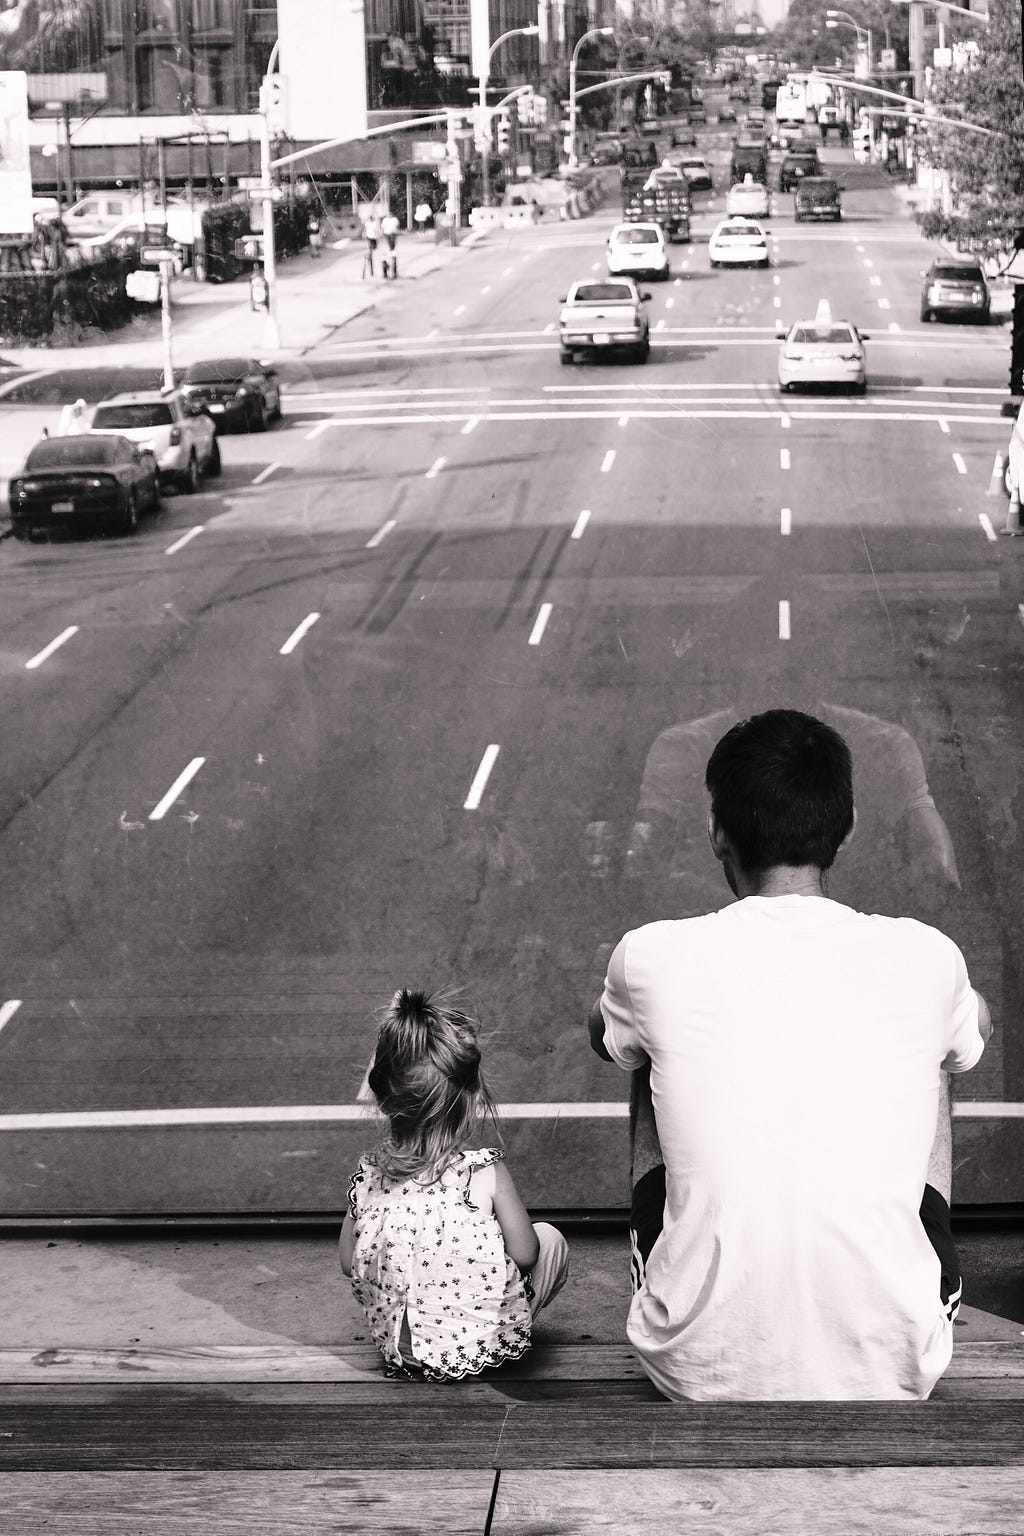 A black and white photo of a multi-lane city street in the background with the backs of a dad and little girl sitting above looking down at the road and distant traffic.